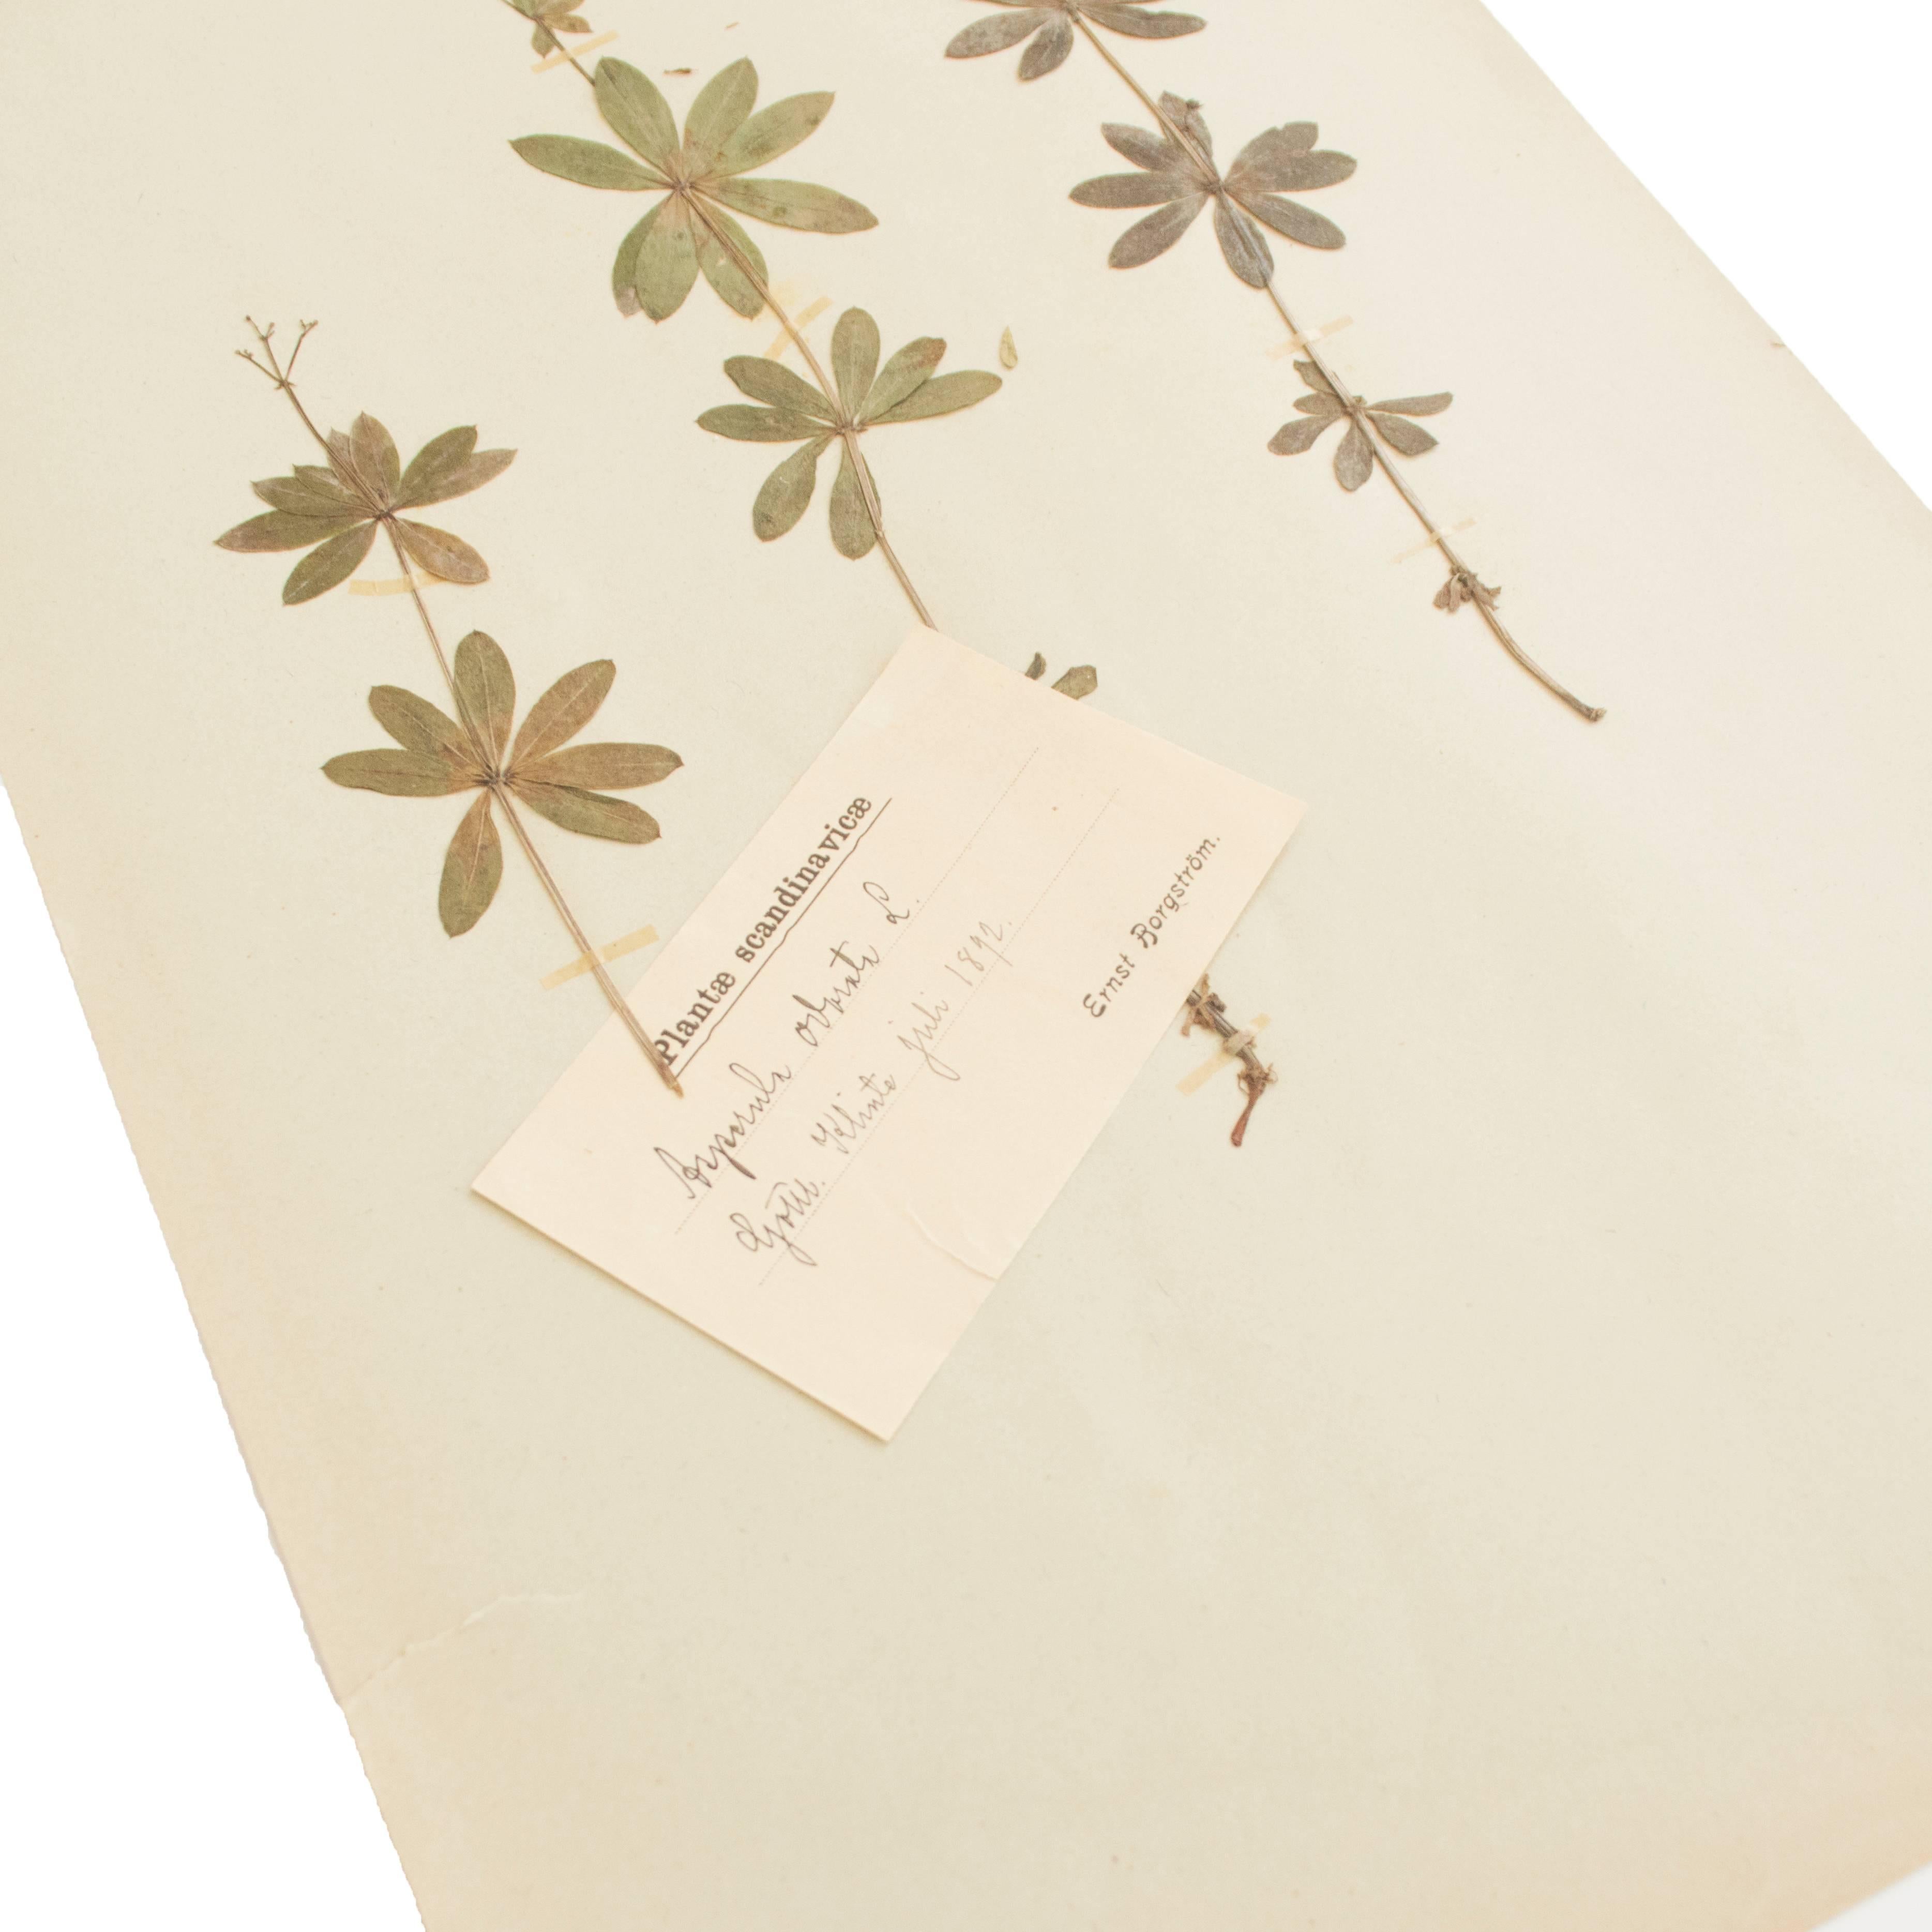 Stunning Herbarium of more than 100 years. A few framed next to each other will bring so much beauty to a room.